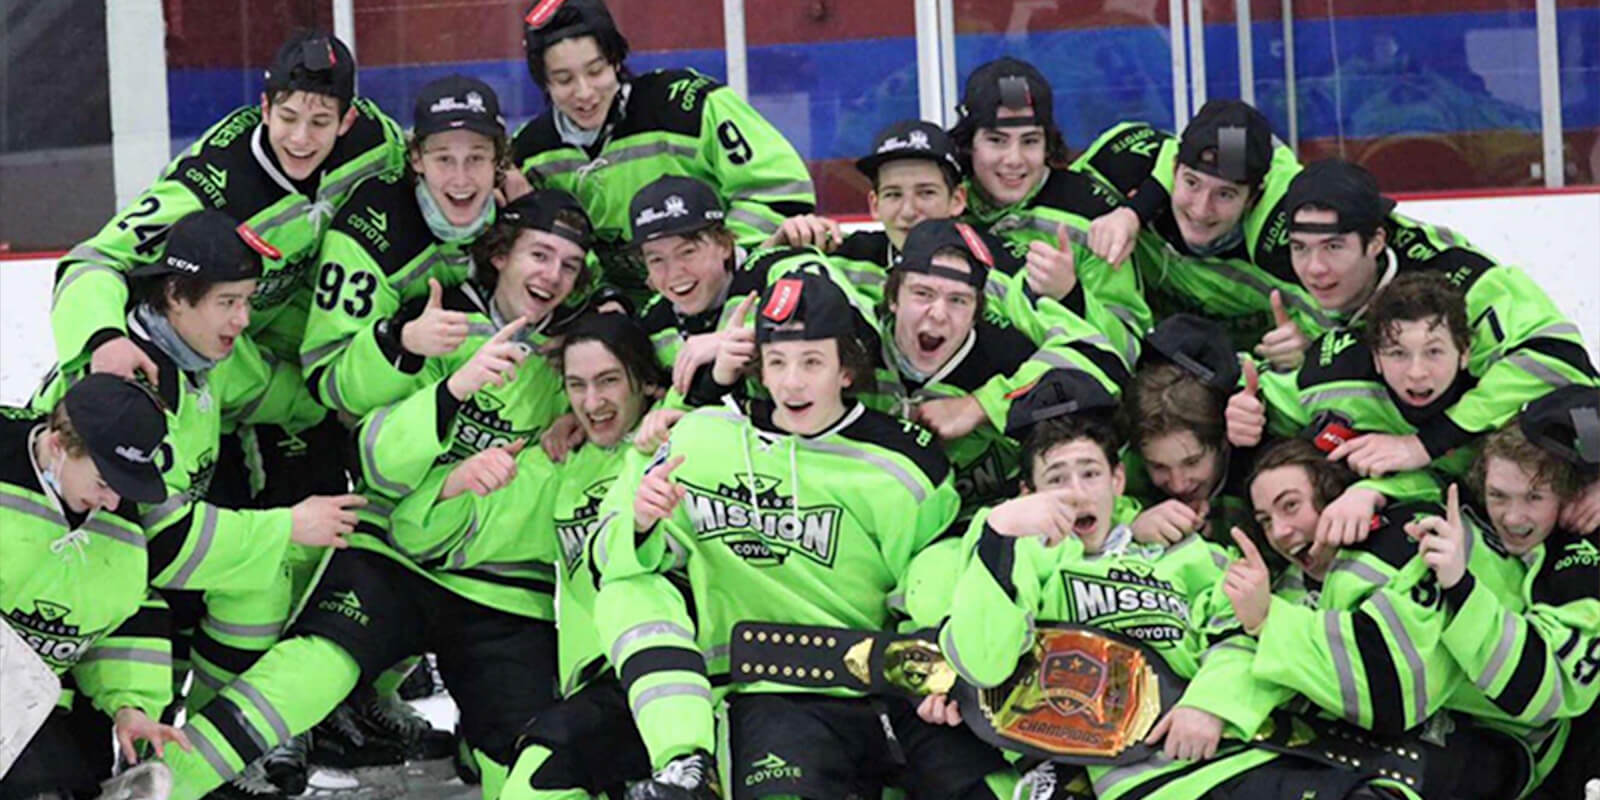 Sporting neon green jerseys, the 15U Chicago Mission hockey team poses on the ice for a championship photo.